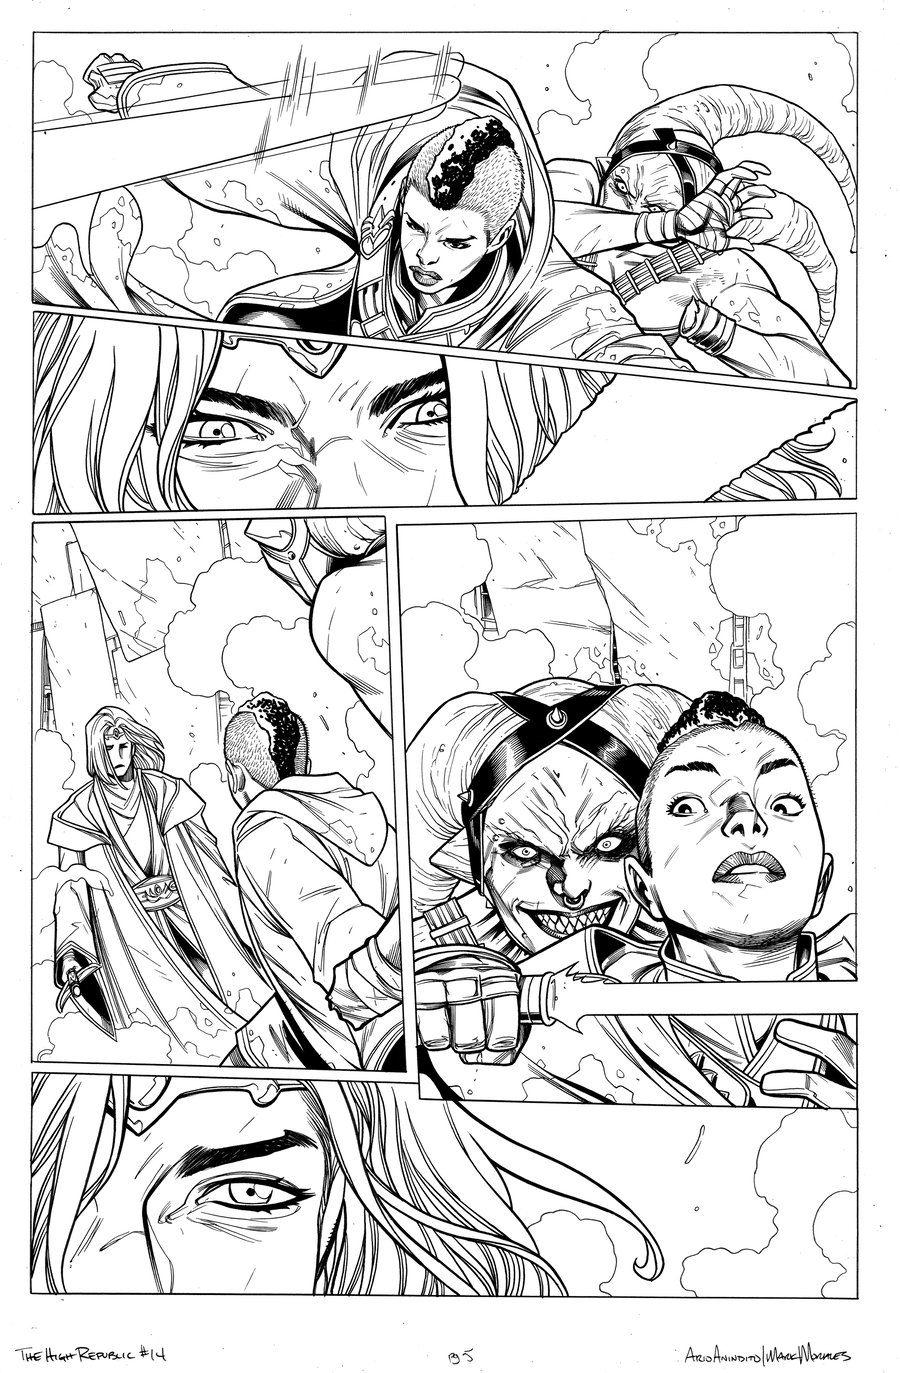 Image of Star Wars: The High Republic #14 PG 5